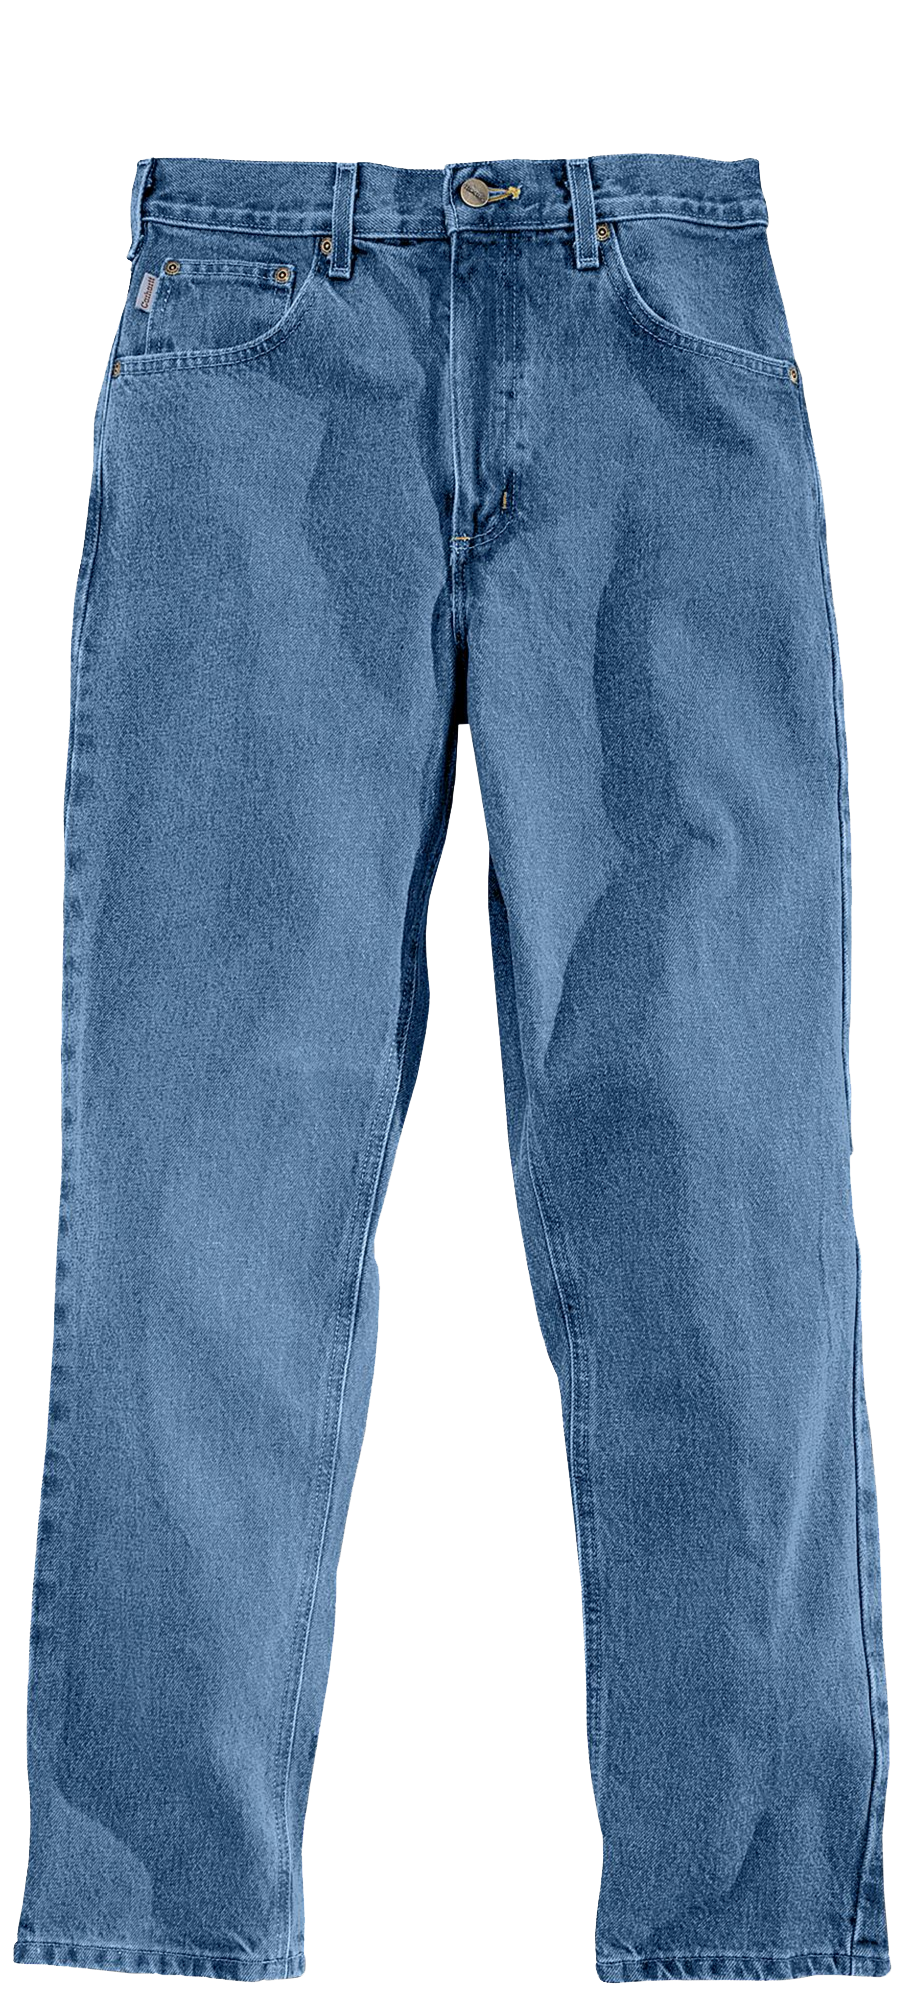 Carhartt 5-Pocket Traditional Fit Jeans for Men | Bass Pro Shops